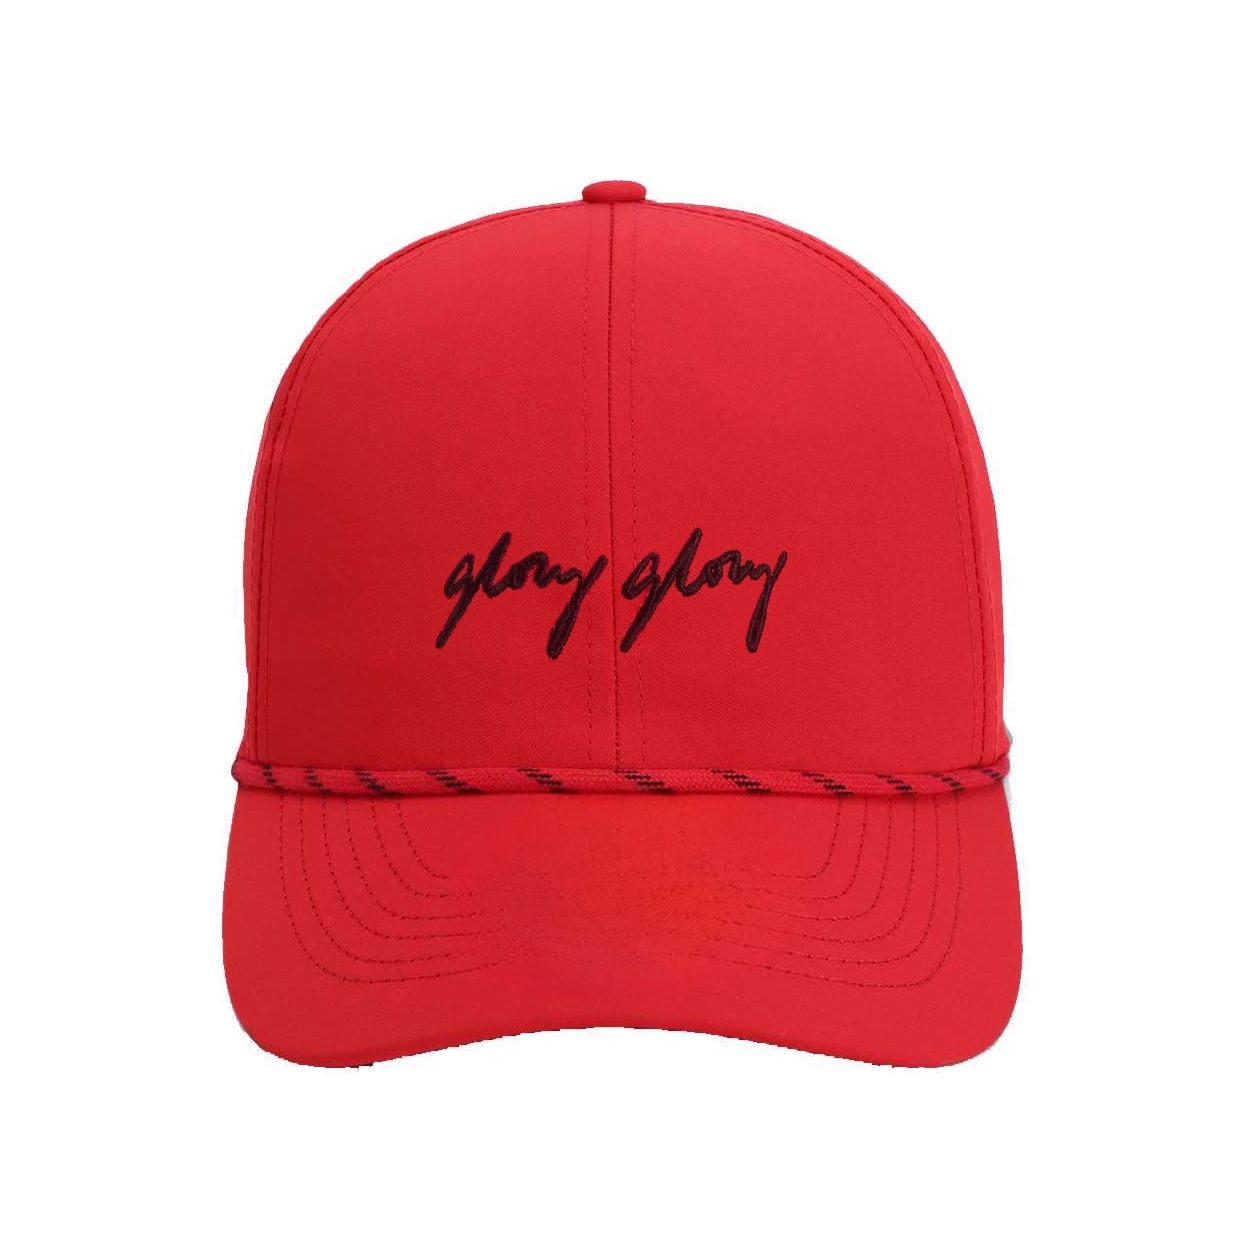 Vintage Red Glory Glory Rope Hat